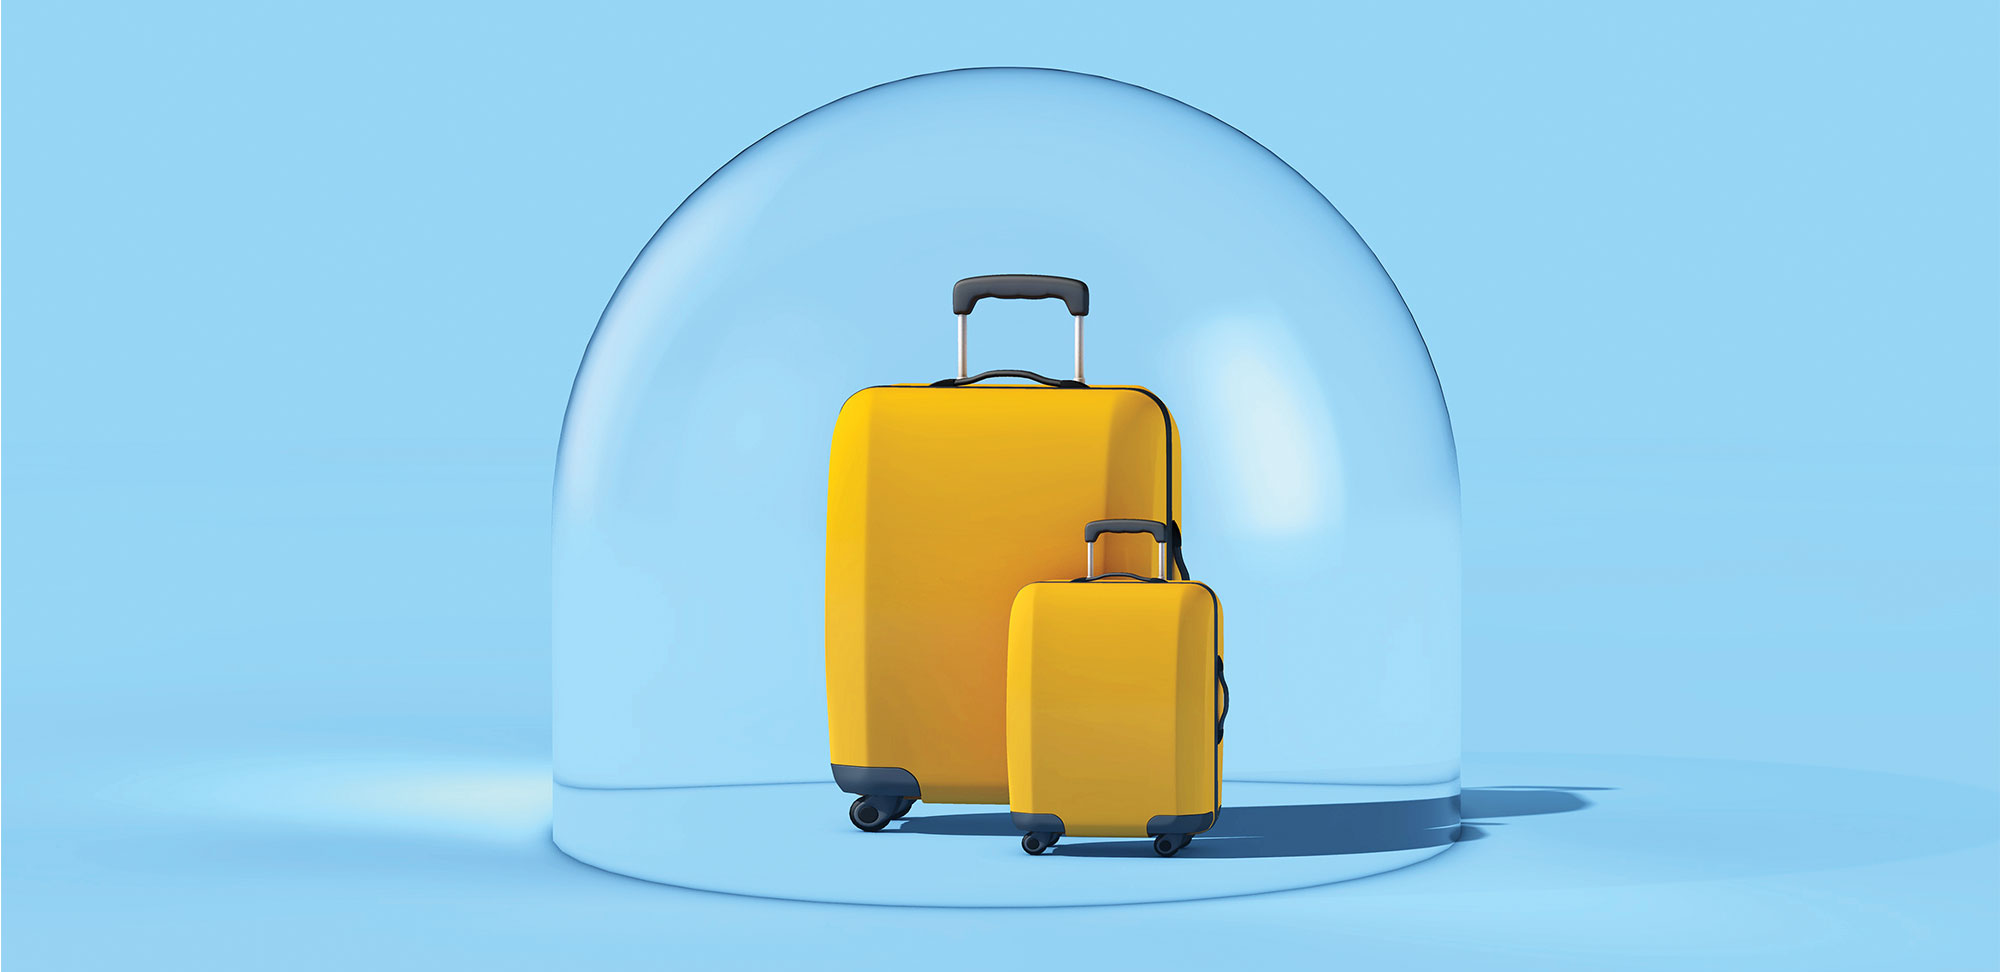 3D Photo illustration of a suitcase with a protective bubble